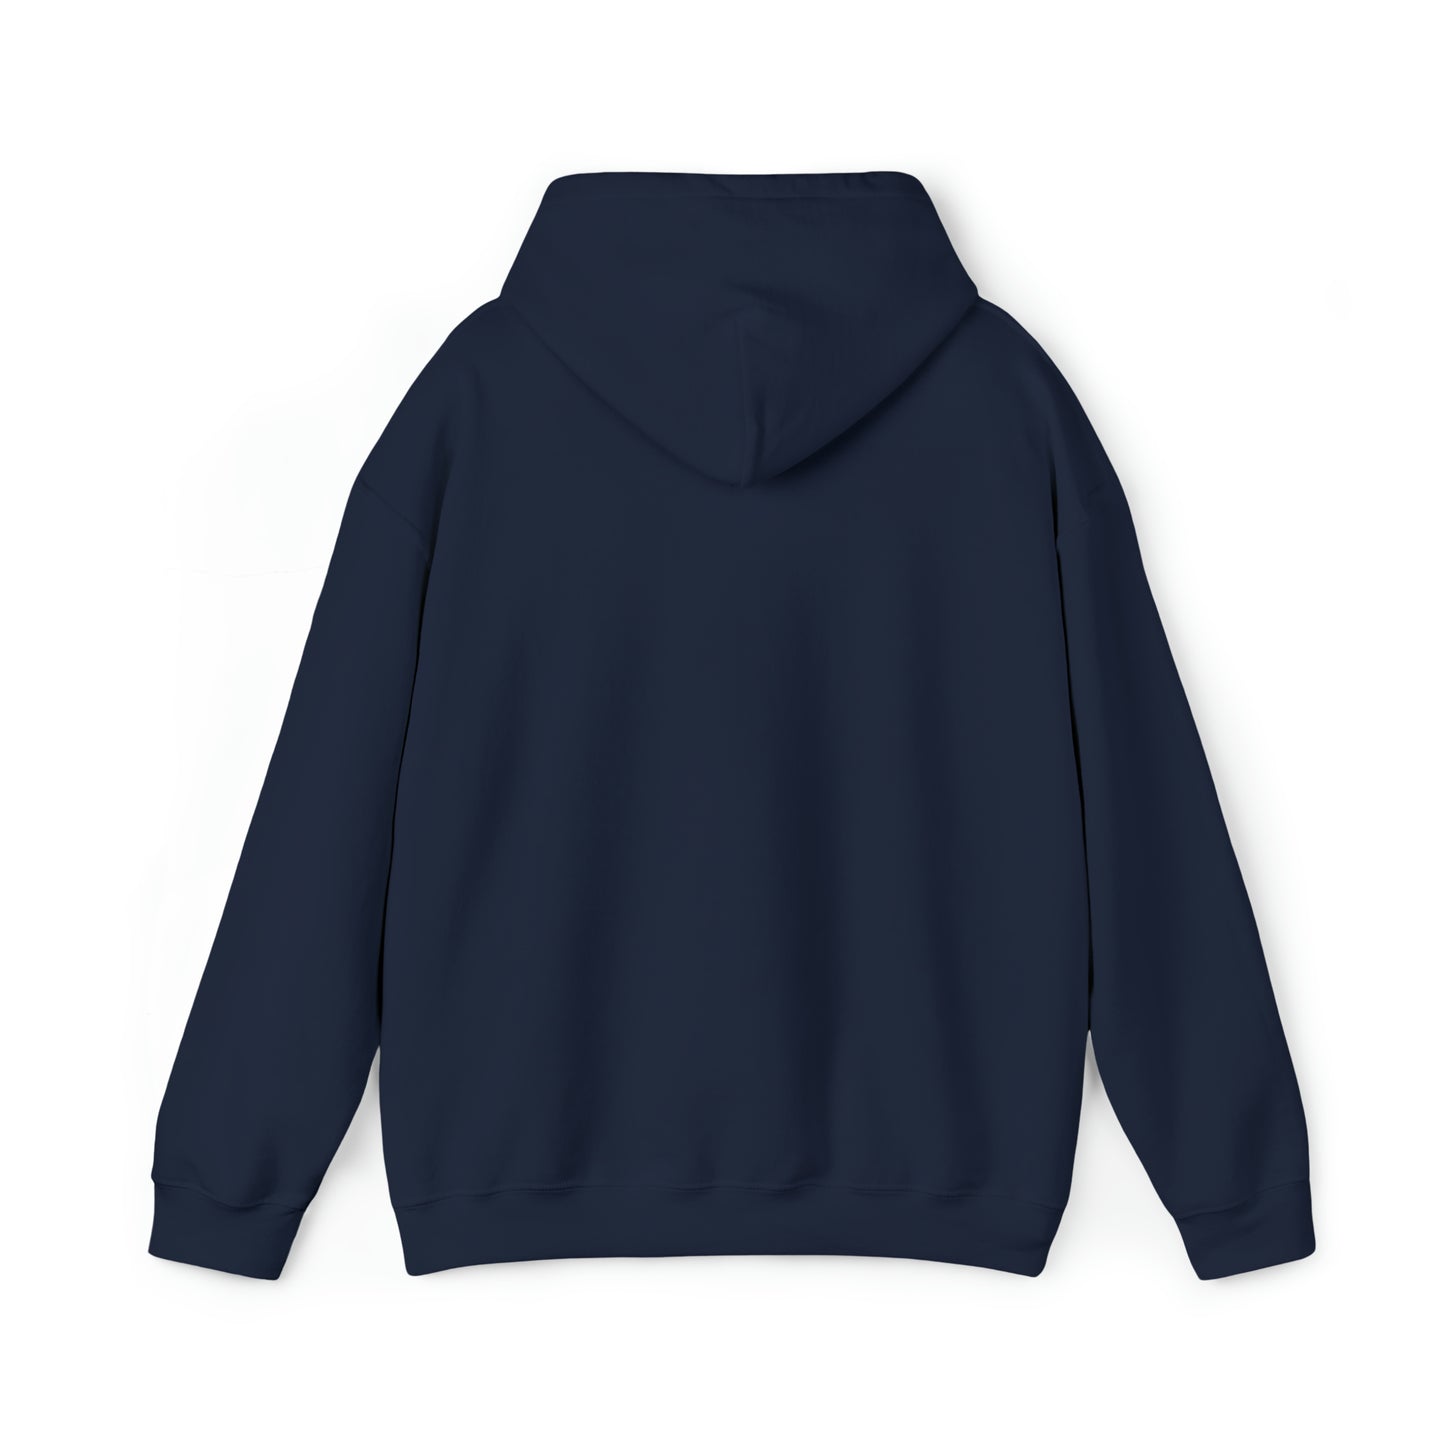 Back of Blue shirt with hood down